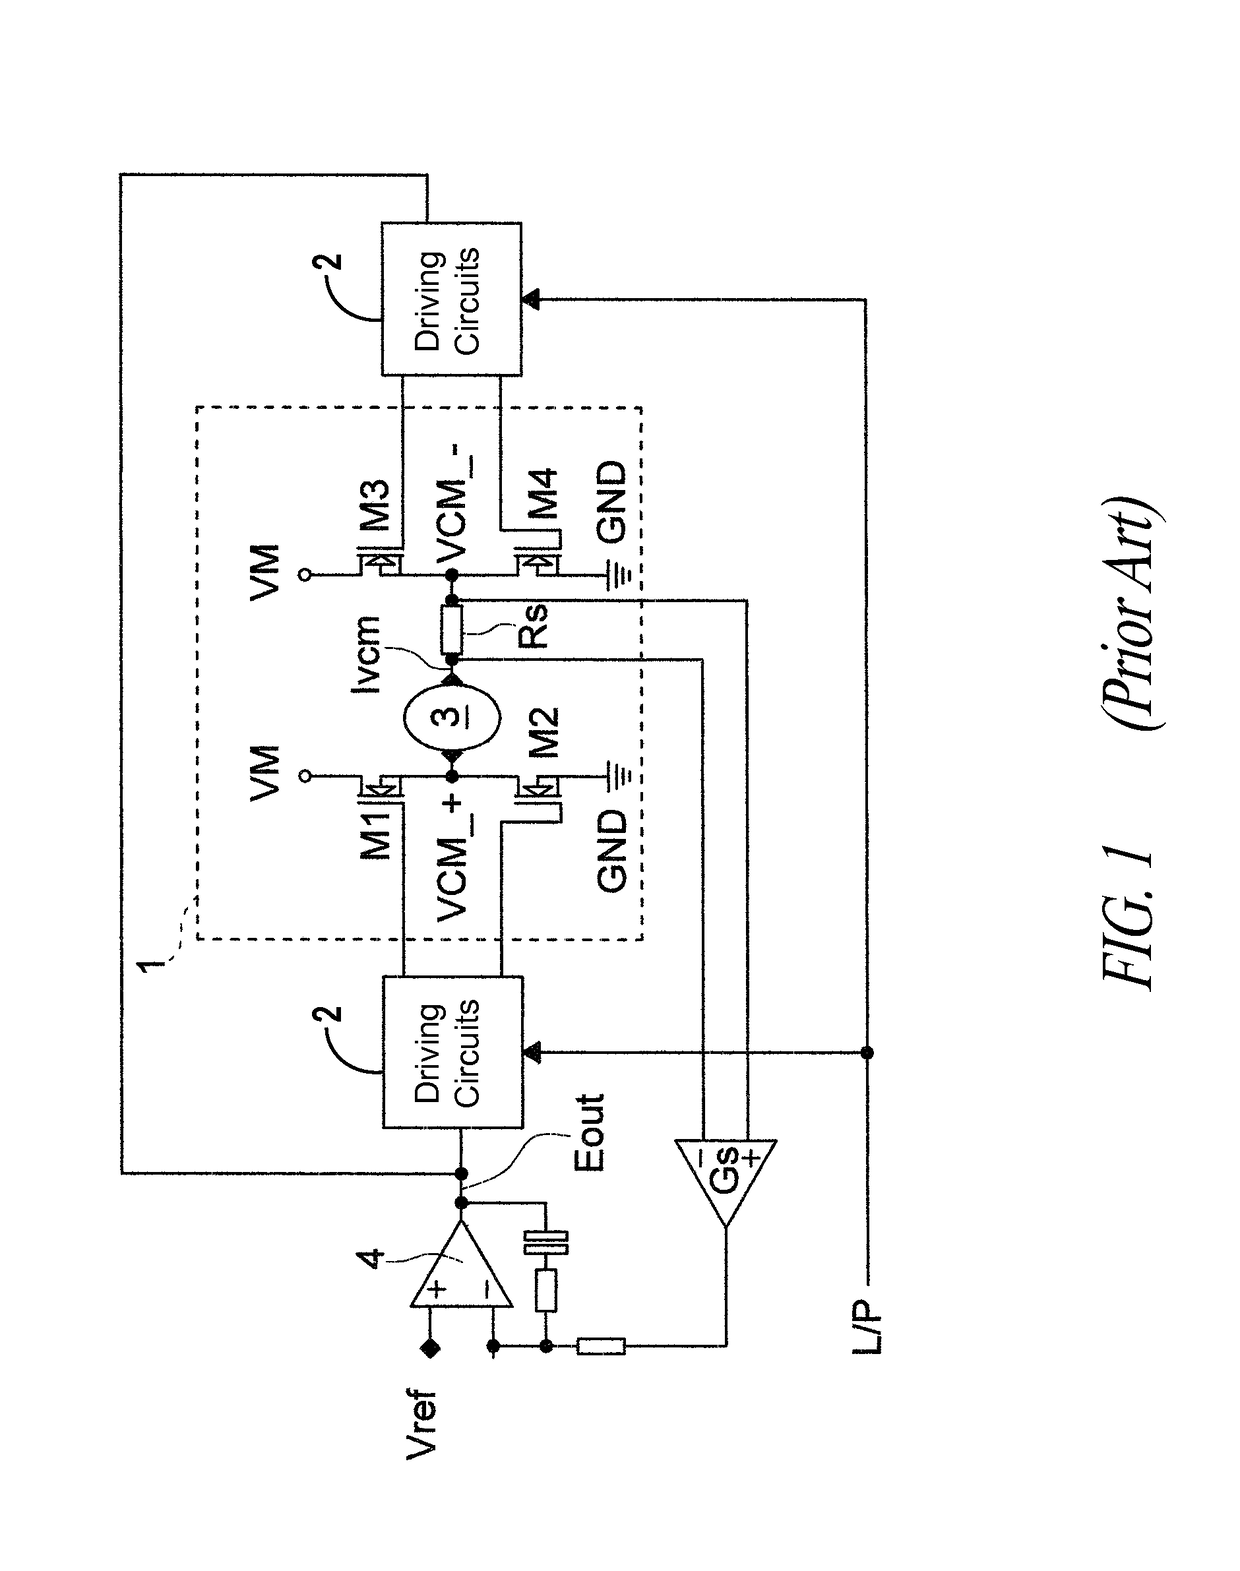 Device to synchronize the change of the driving mode of an electromagnetic load